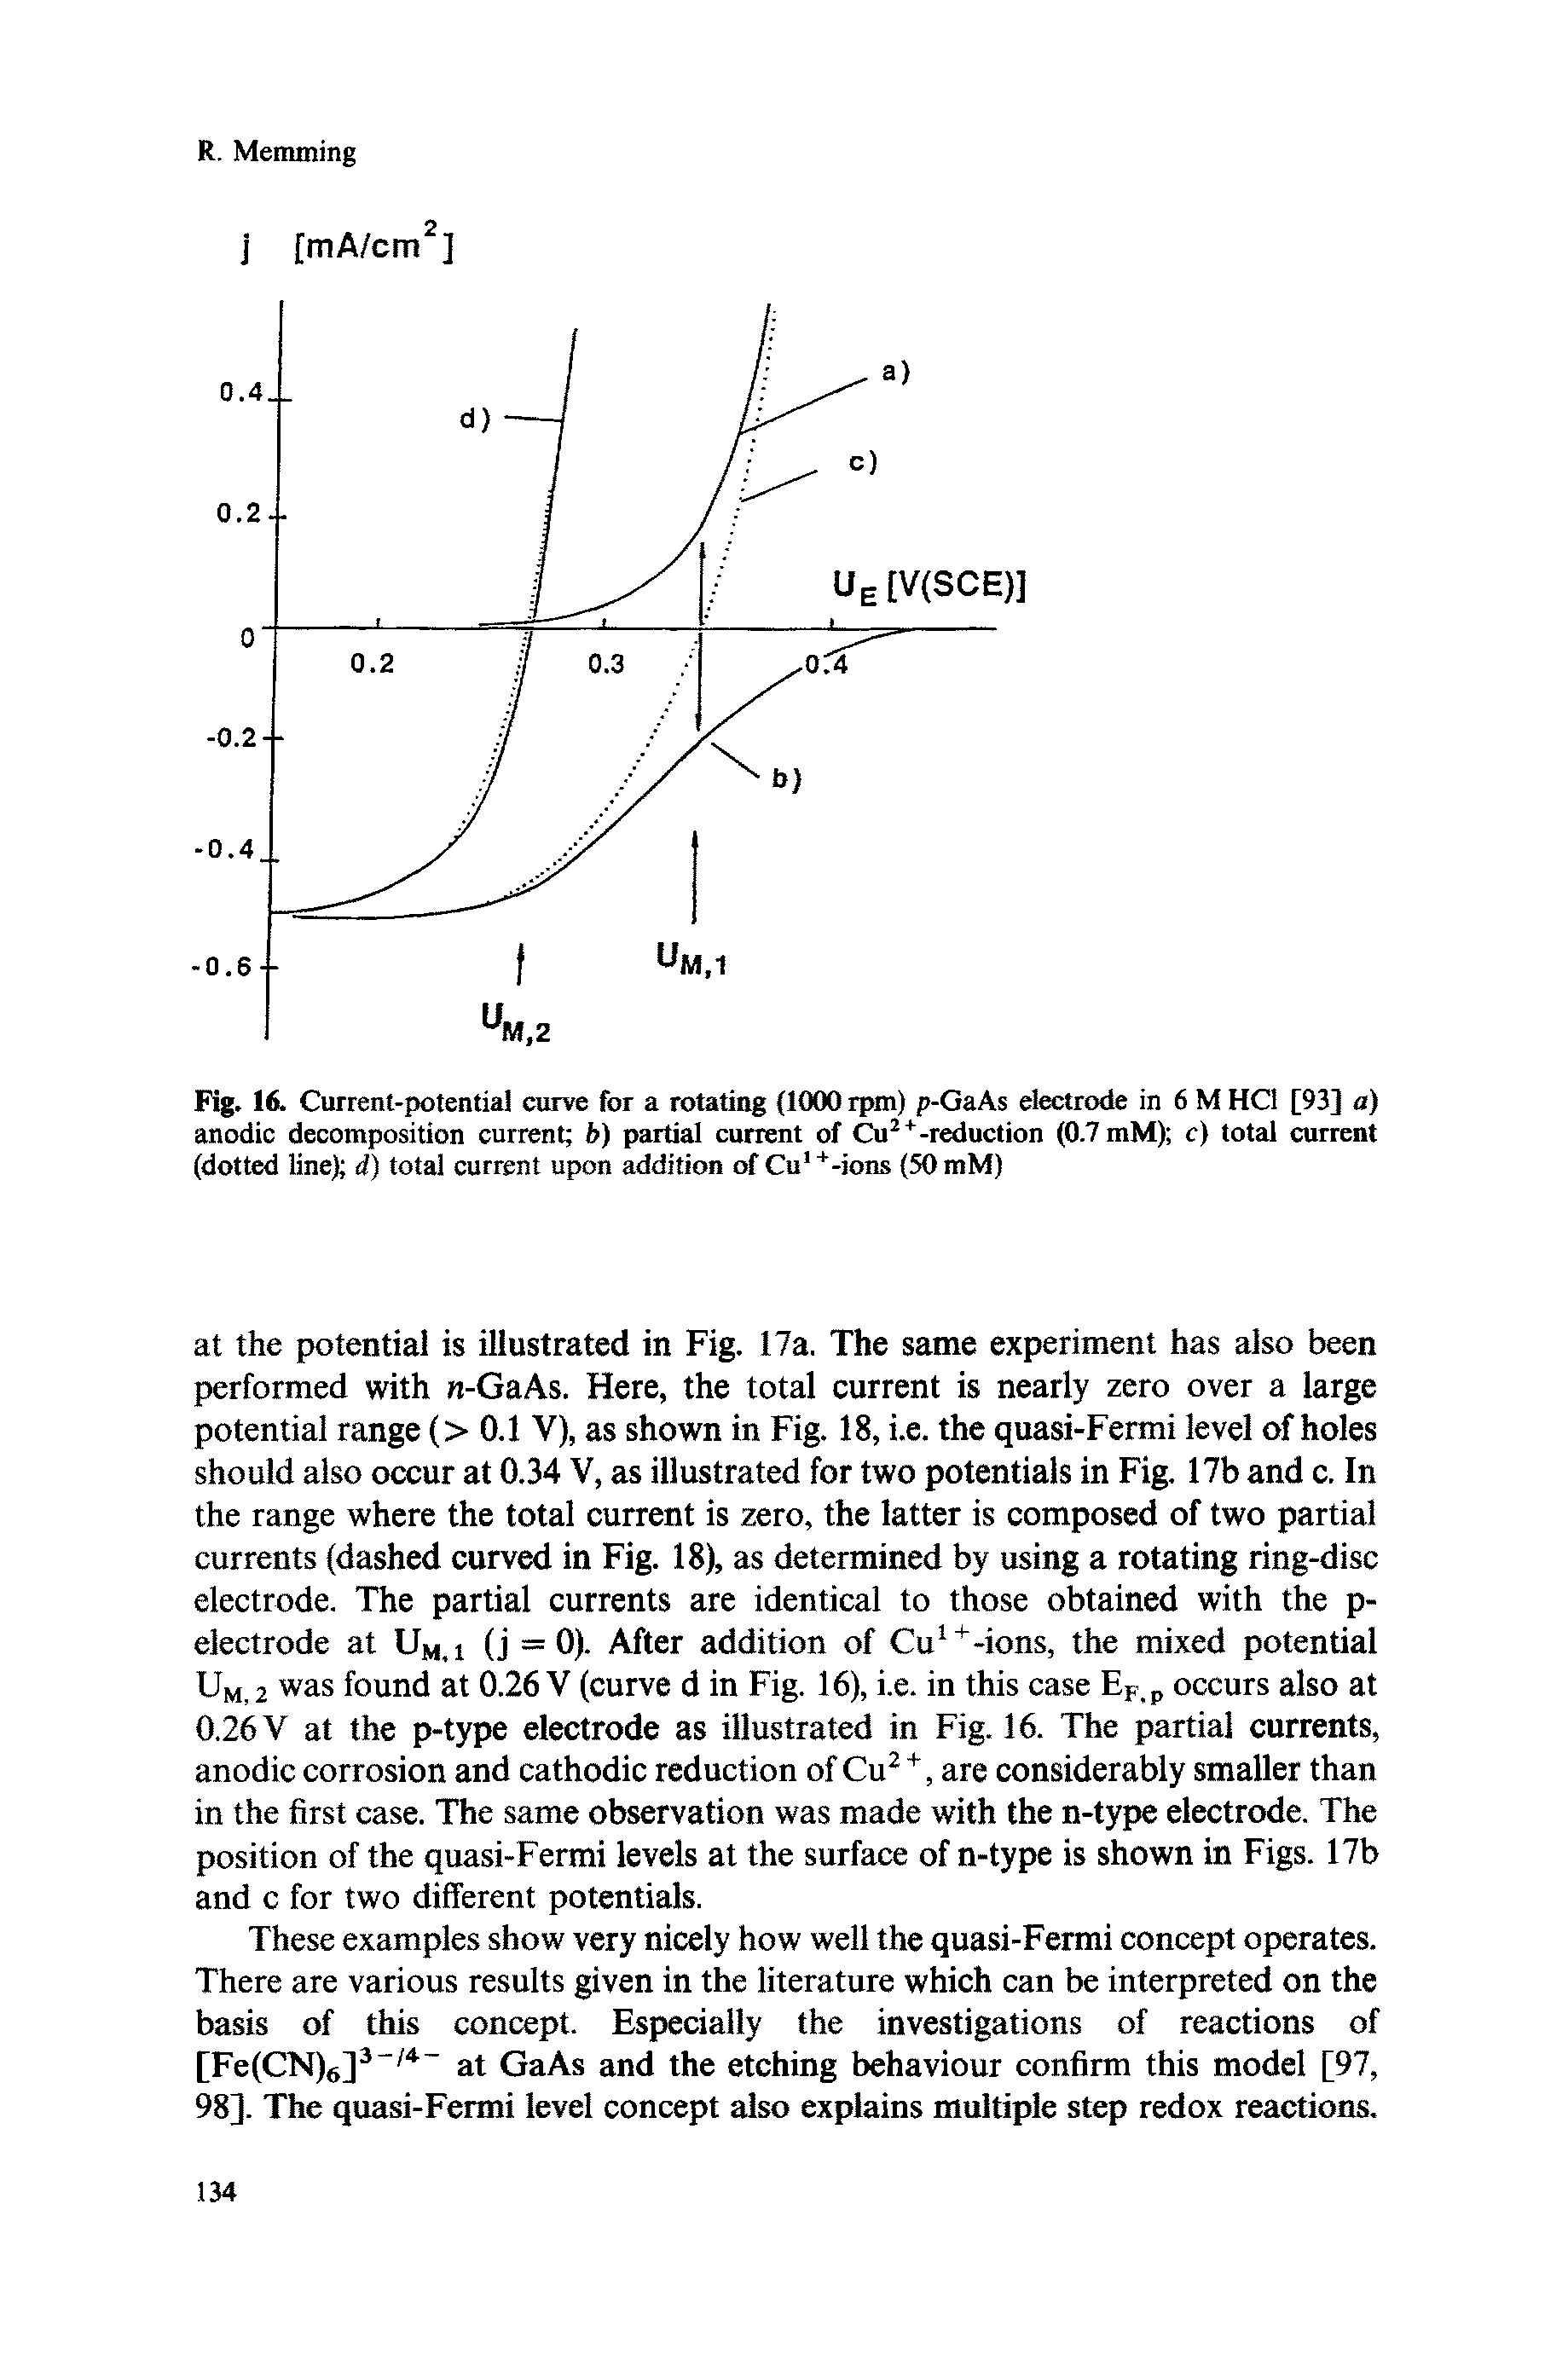 Fig. 16. Current-potential curve for a rotating (1000 rpm) p-GaAs electrode in 6 M HCI [93] a) anodic decomposition current b) partial current of Cu -reduction (0.7 mM) c) total current (dotted line) d) total current upon addition of Cu " -ions (50 mM)...